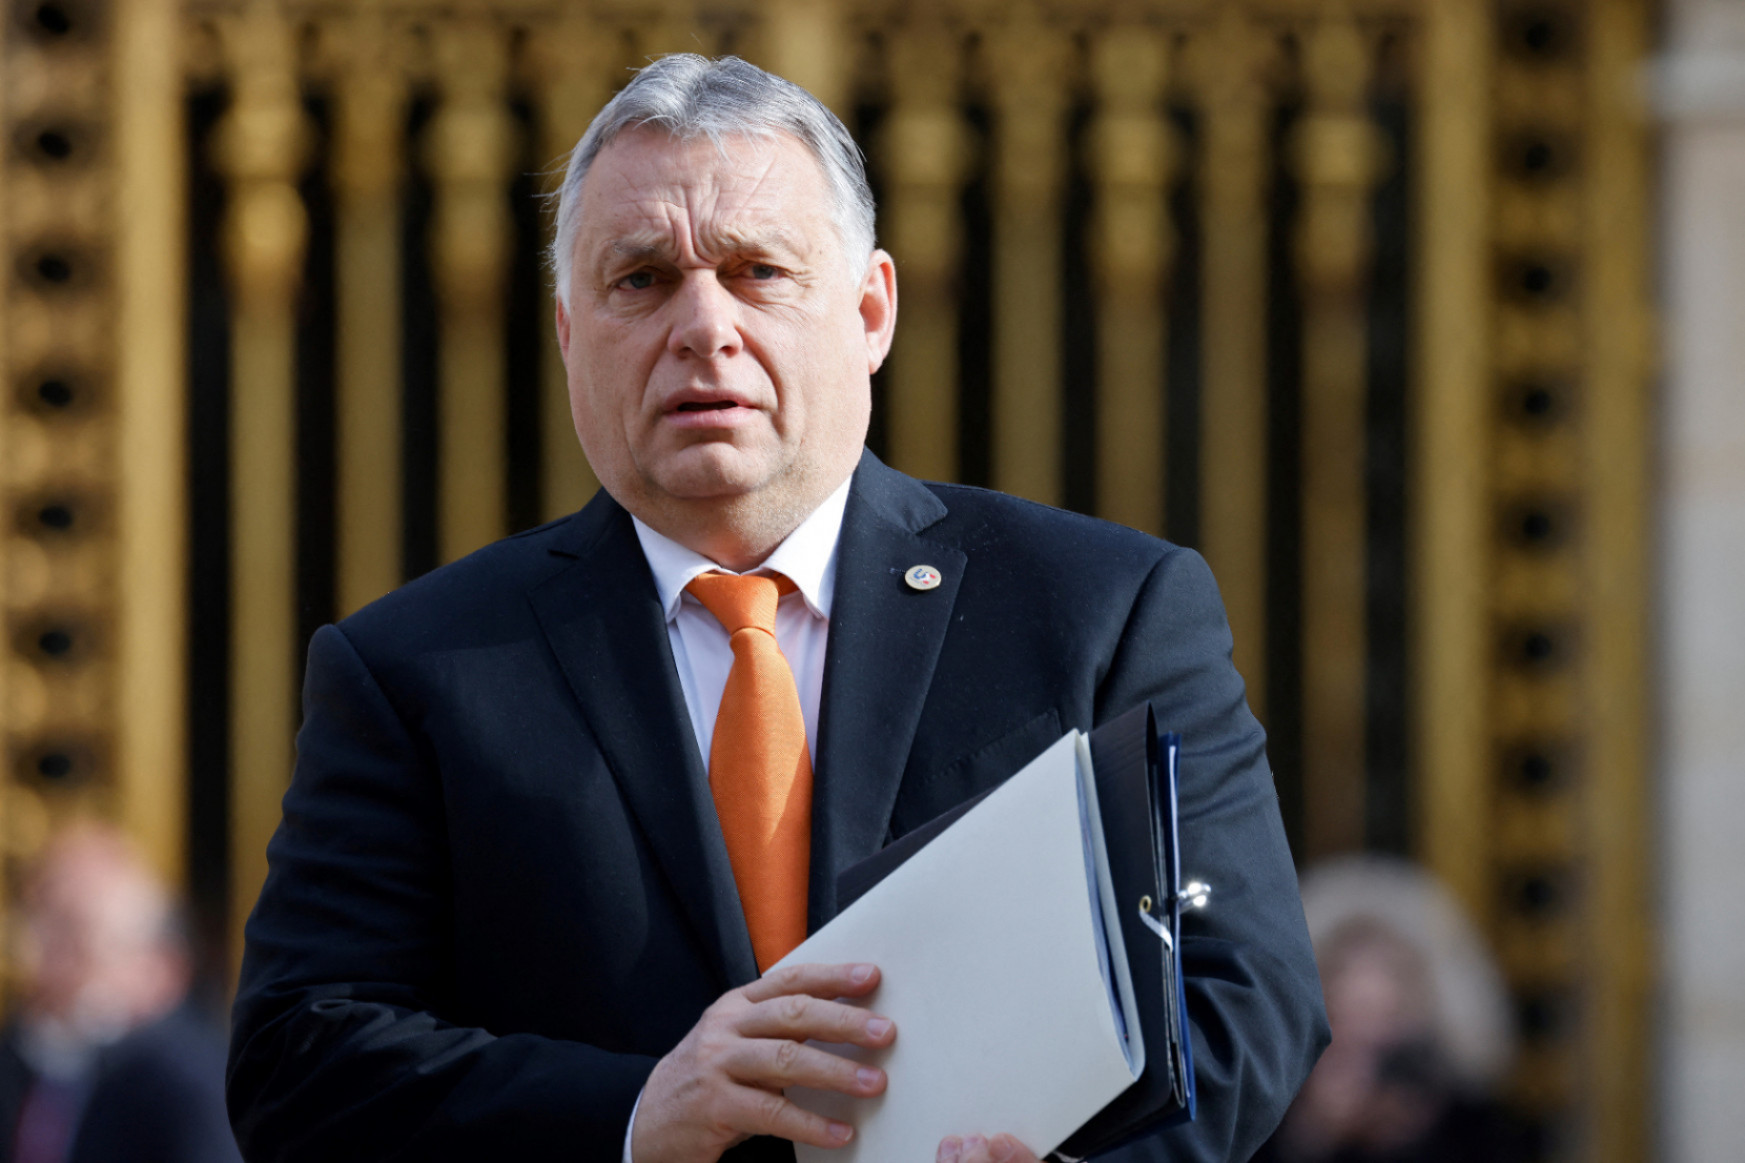 Orbán: Campaign or not, we must do well in Brussels